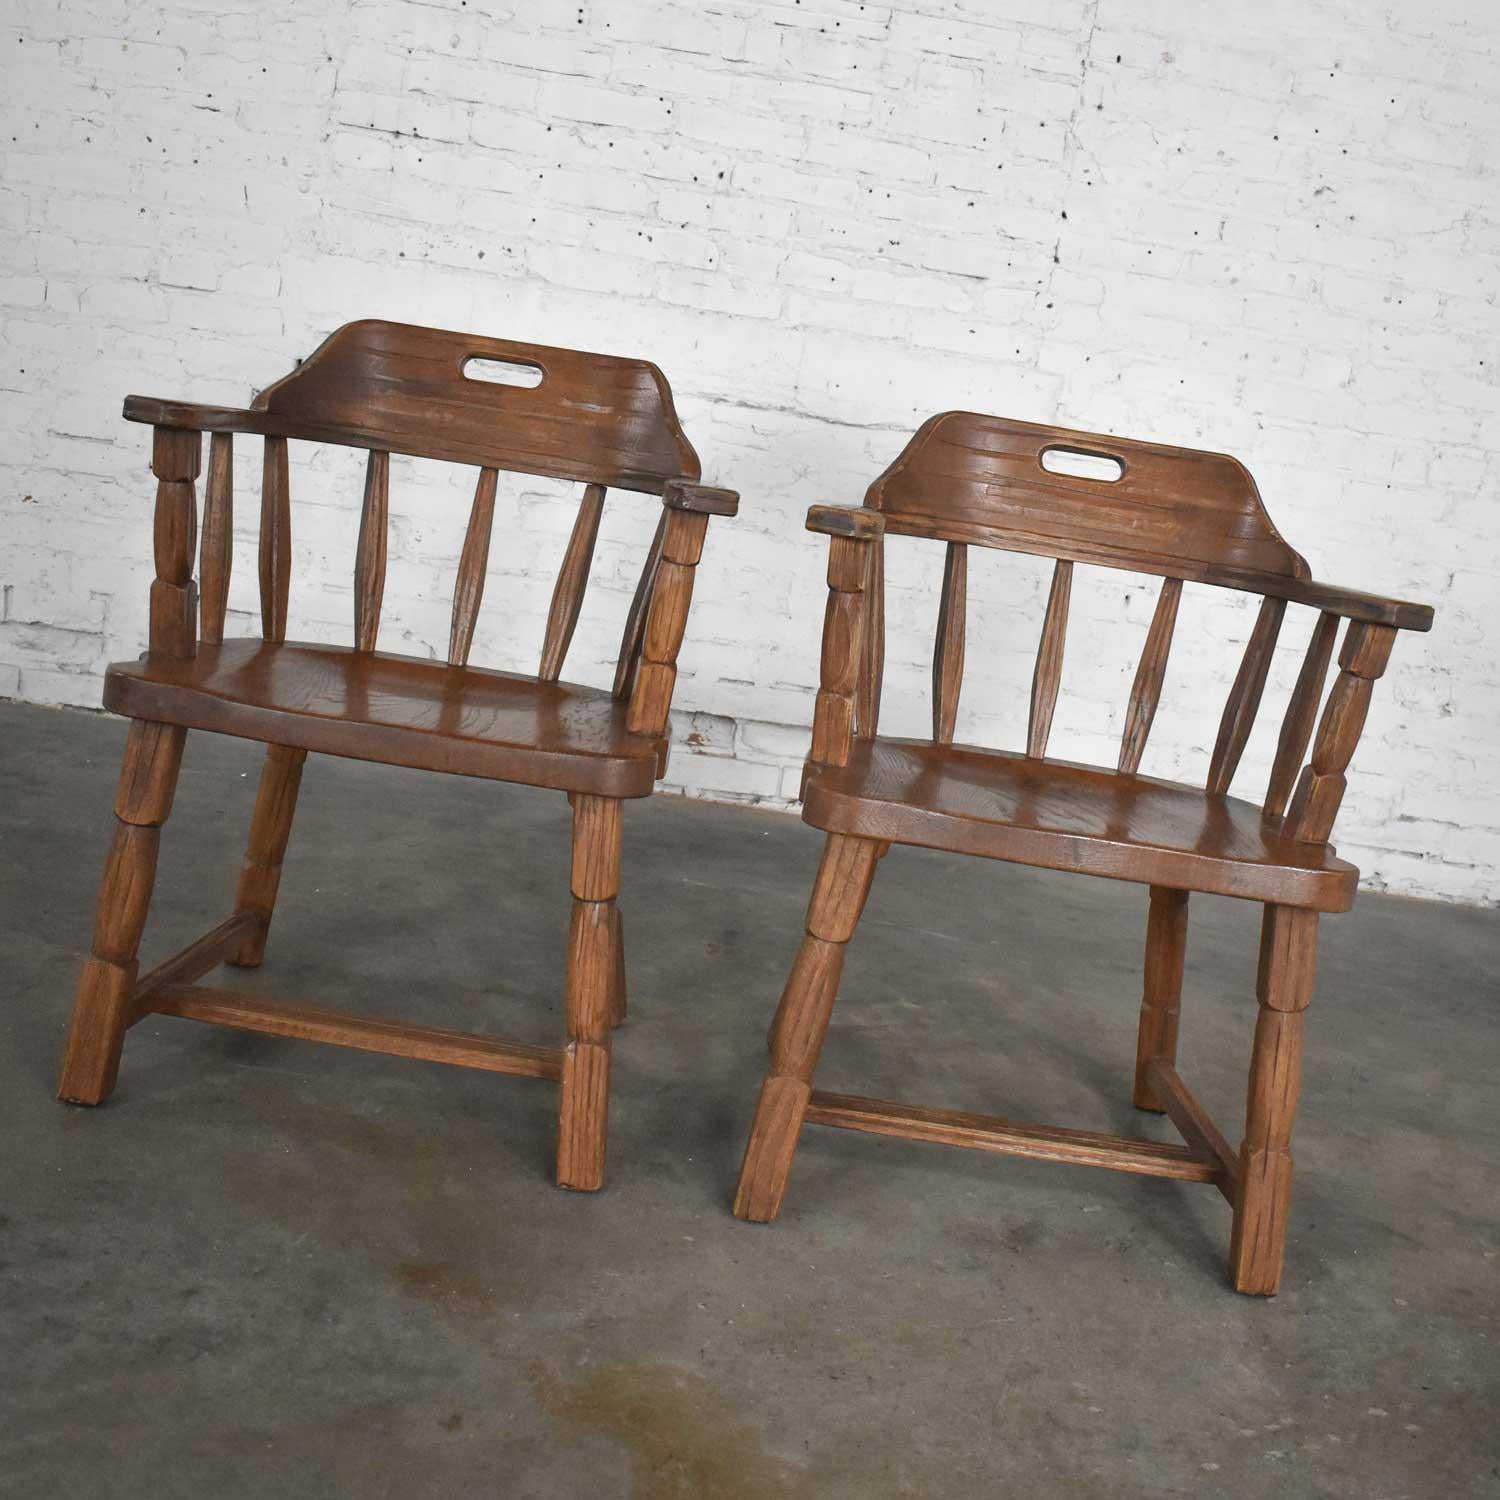 Wonderful pair of vintage captains’ armchairs by A. Brandt comprised of solid ranch oak with acorn brown finish. Gorgeous vintage condition. The arm joints have been tightened and the finish has been restored but is original. Please see photos,